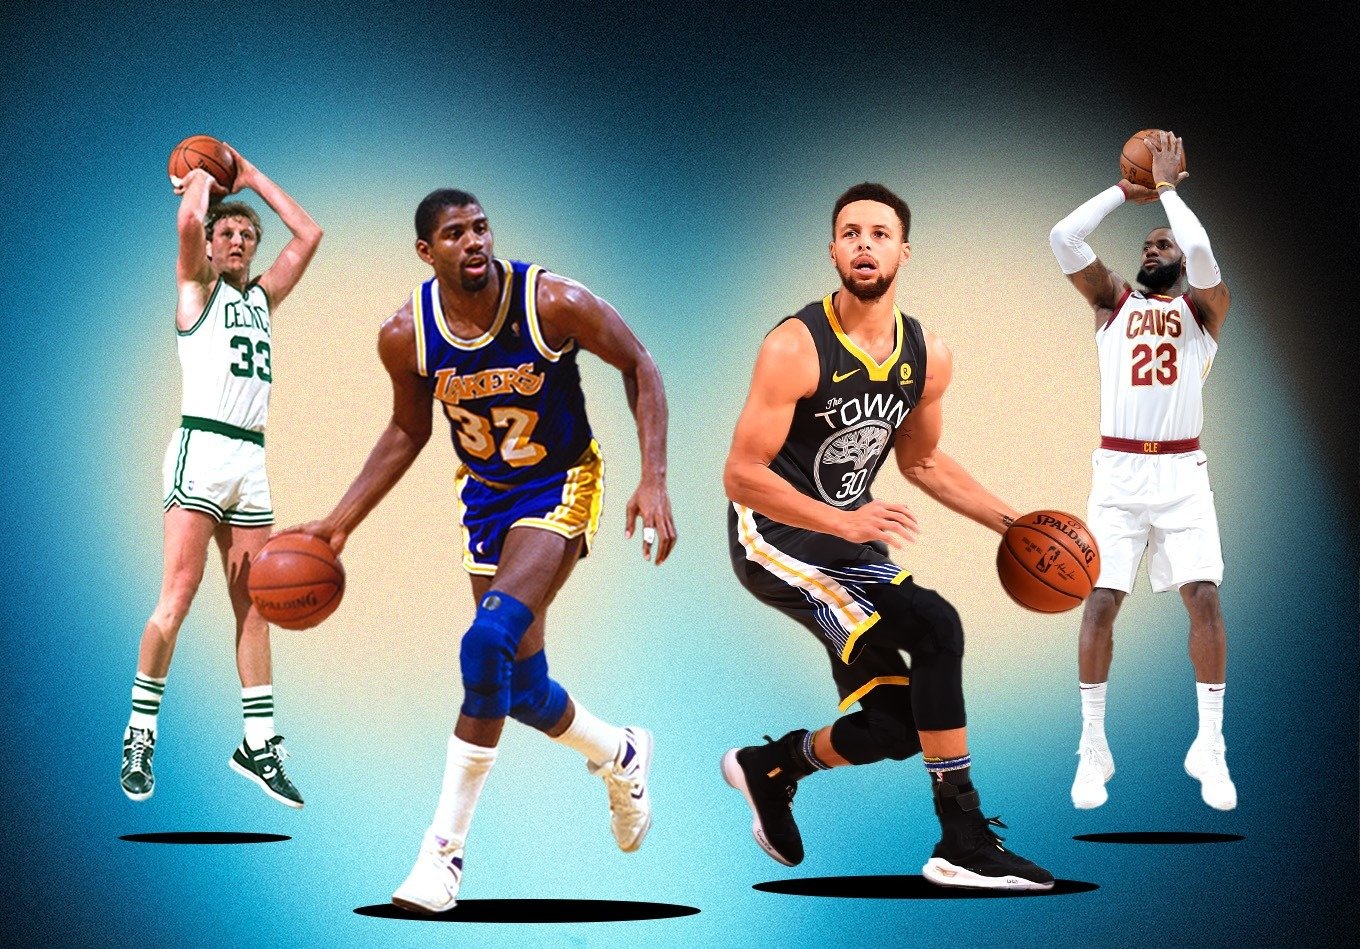 Top 10 Highest Scoring NBA Games Of All Time